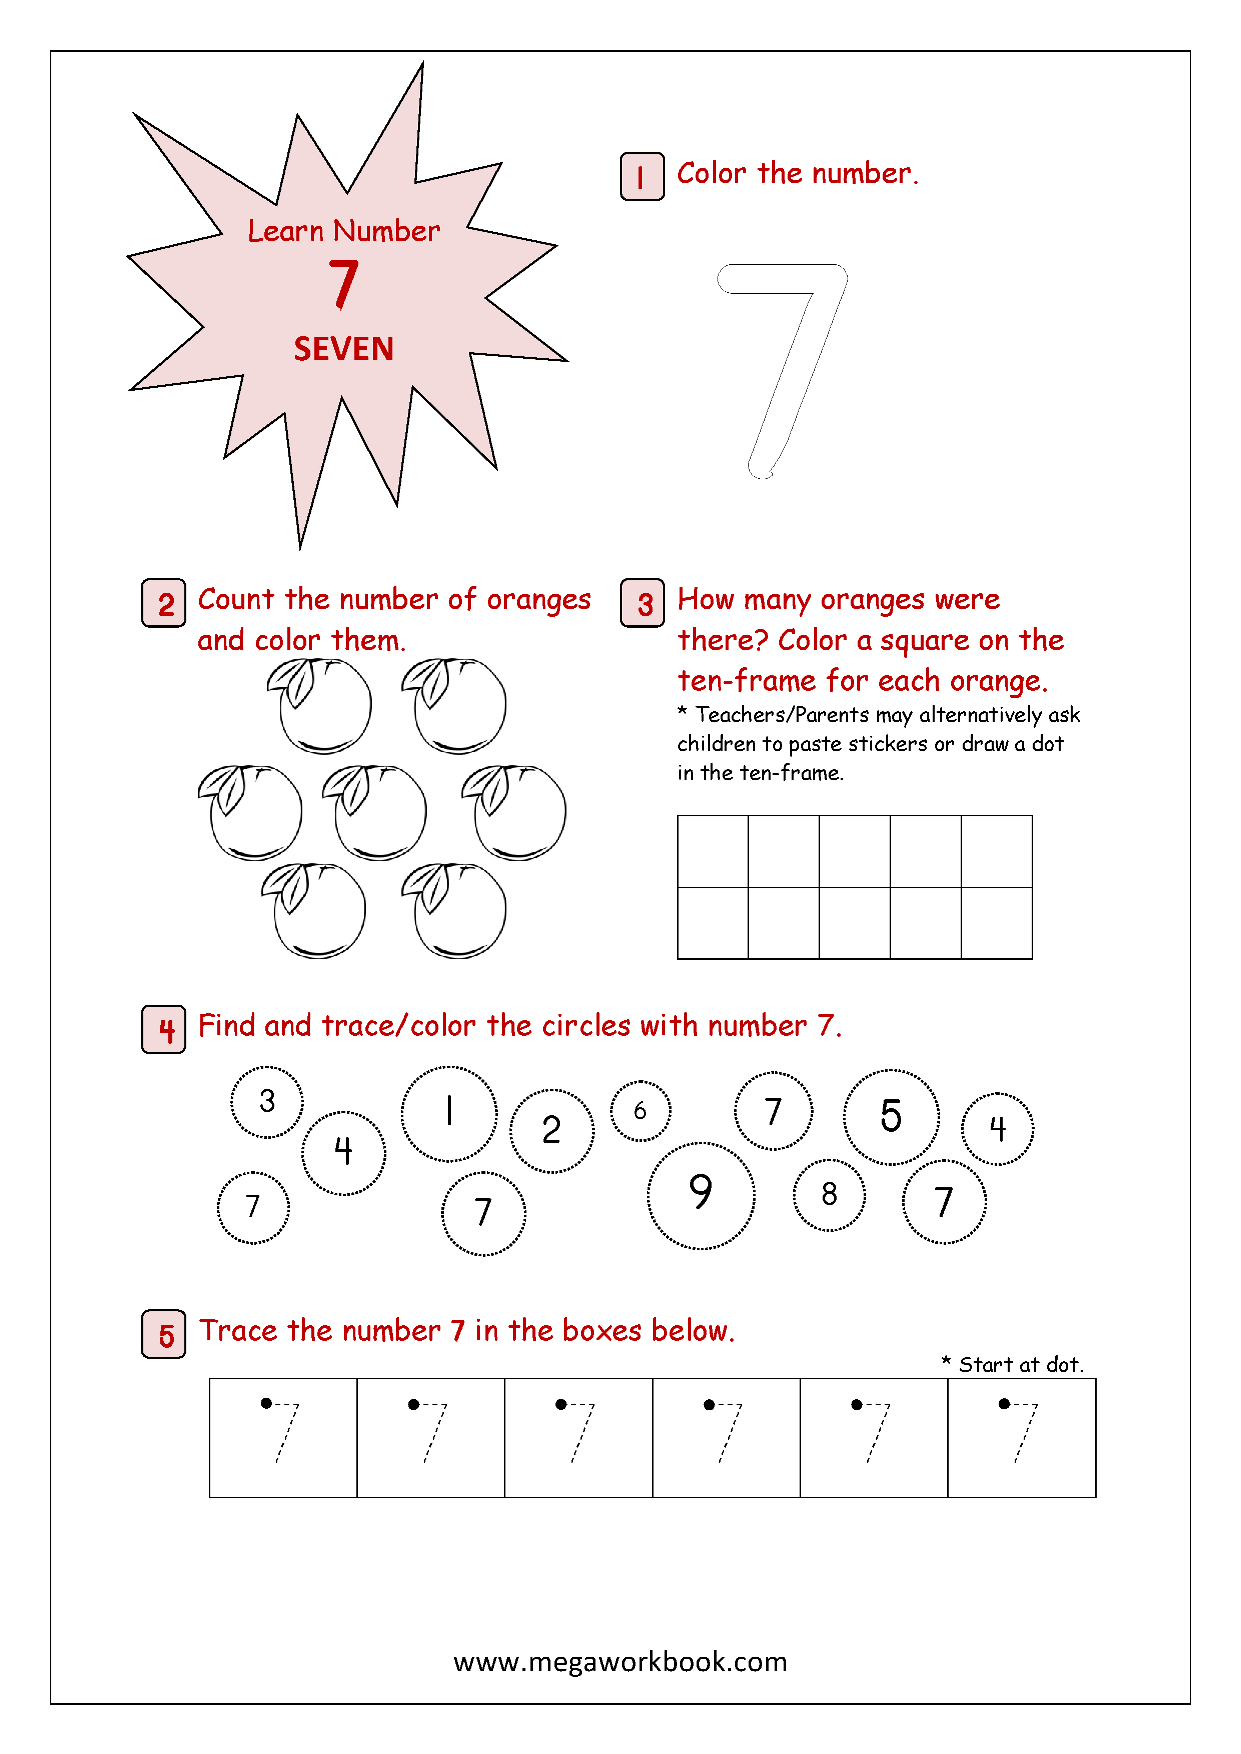 Free Printable Number Recognition 1 To 10 Activity Sheets Number 